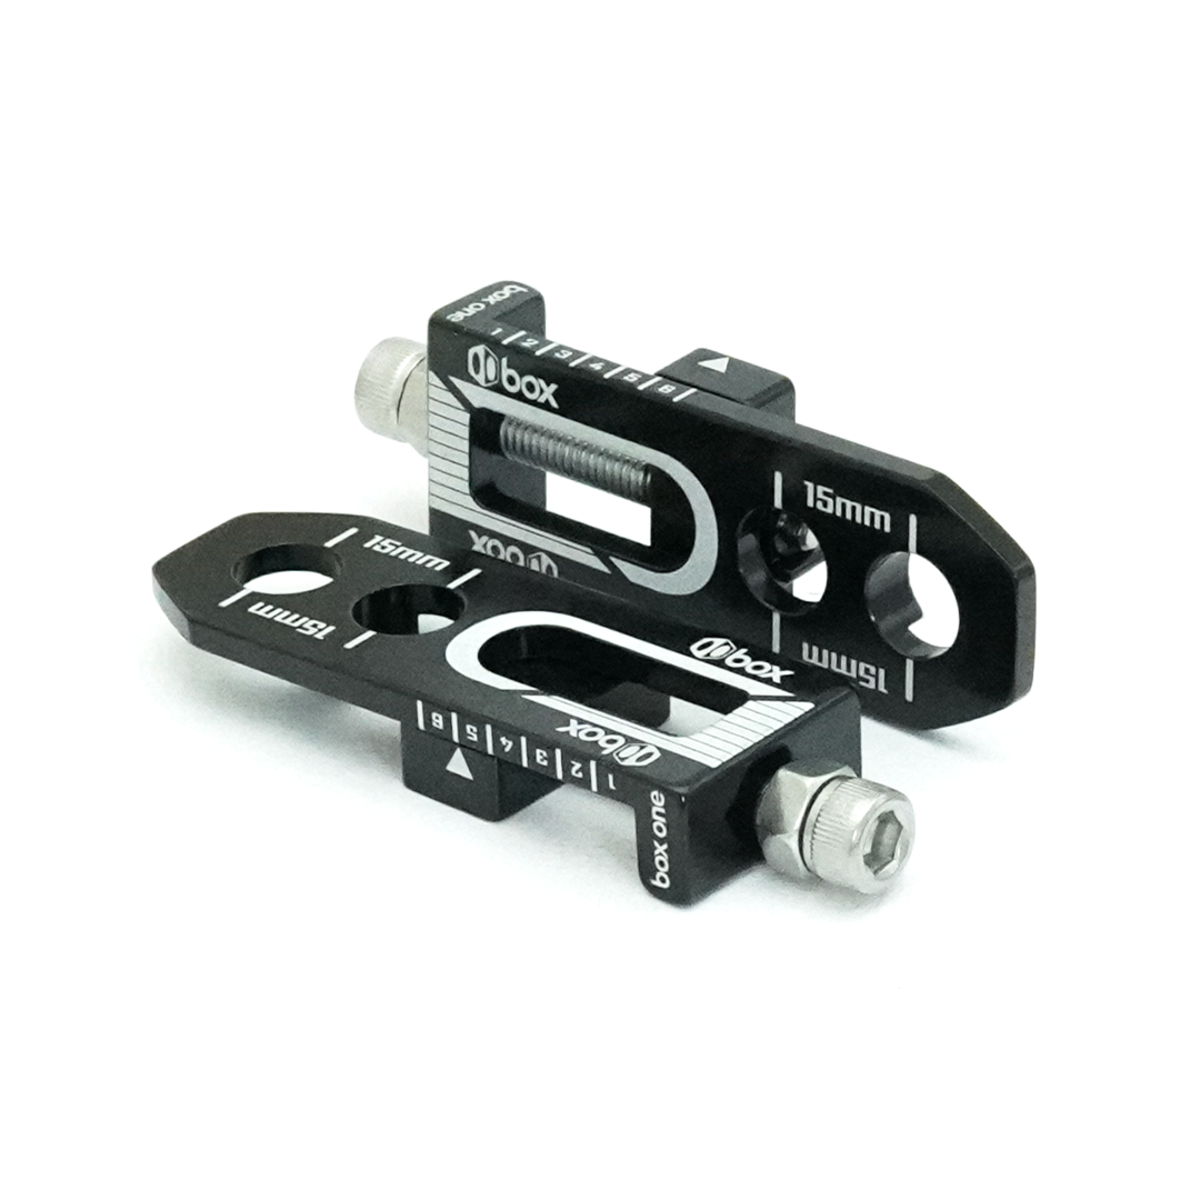 BOXCOMPONENTS One Chain Tensioner 10mm x 2 Axle Hole